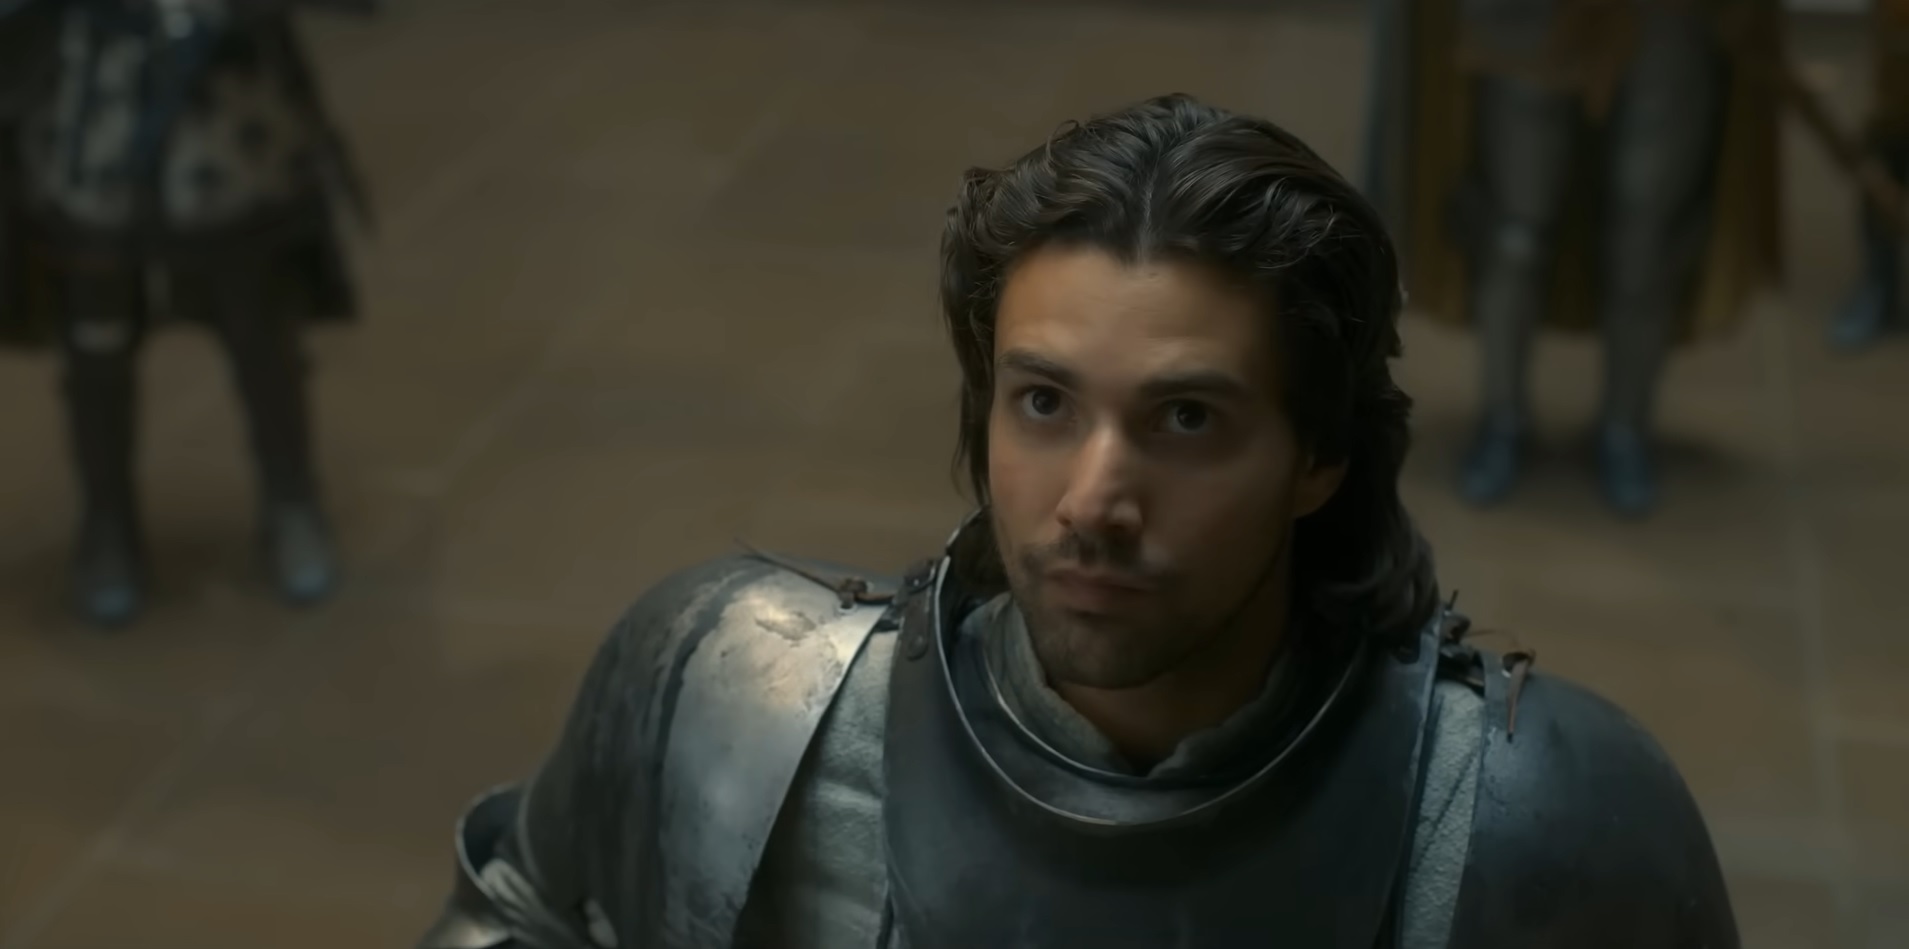 House of the Dragon's Fabien Frankel: "I felt that Ser Criston Cole is certainly looked down upon by characters like Daemon and people from the wealthy families of Westeros"